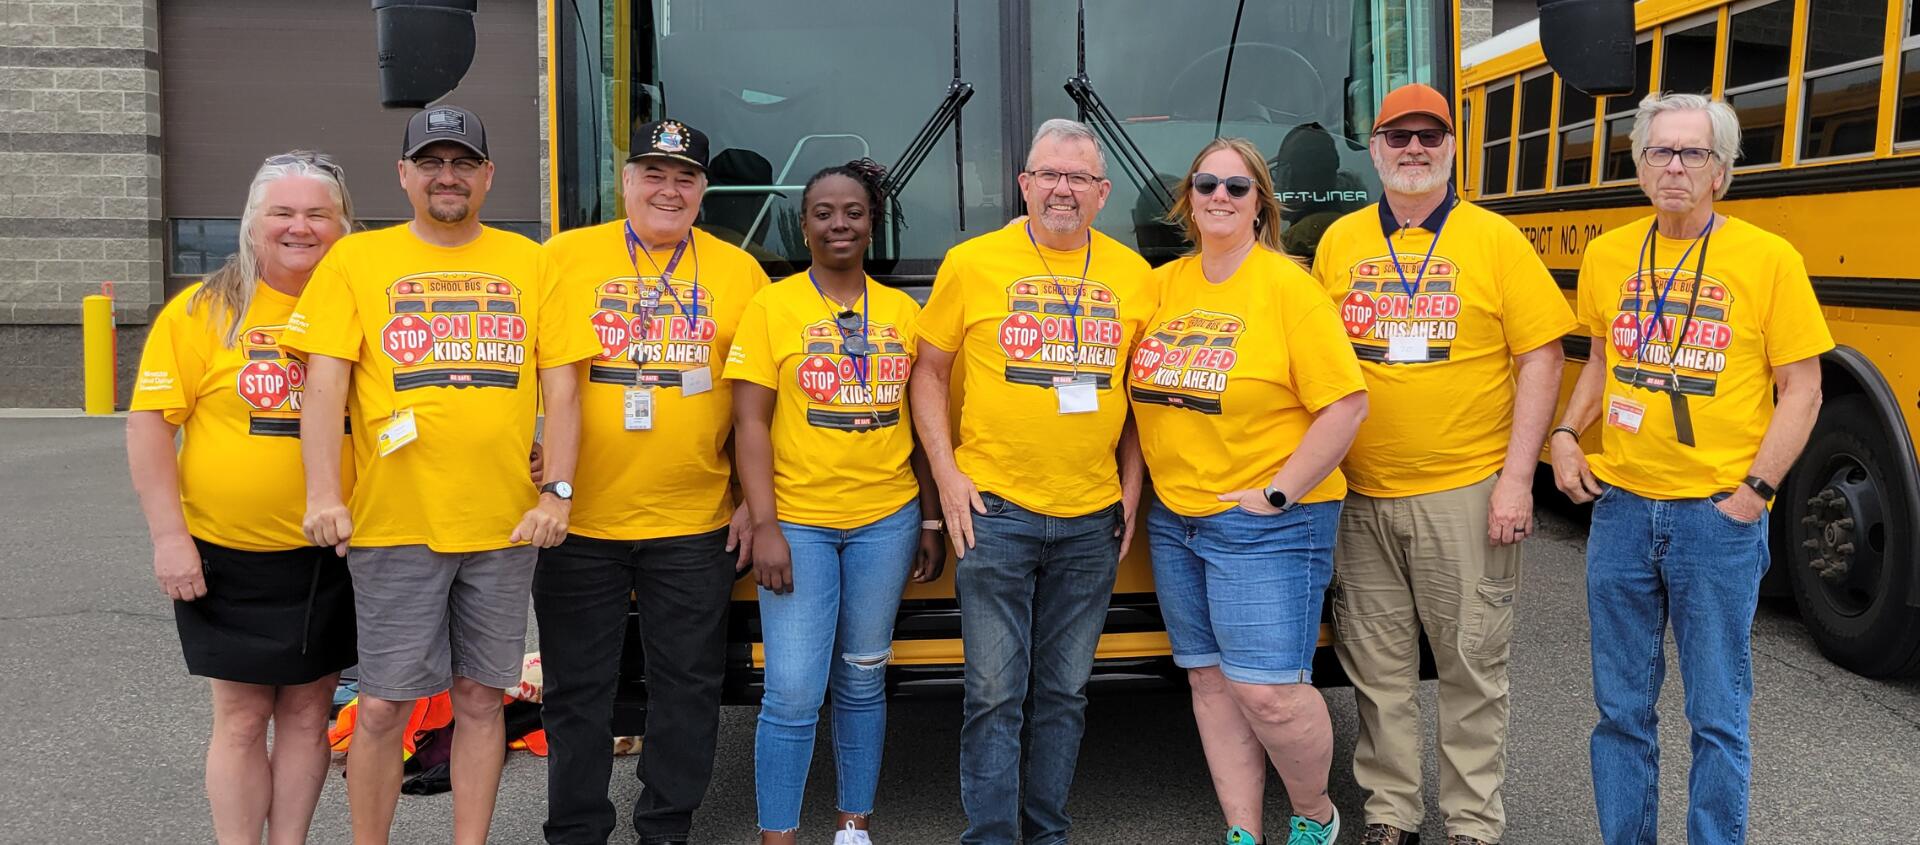 Bus Drivers Wrangle Top Spots at Bus Driver 'Roadeo'